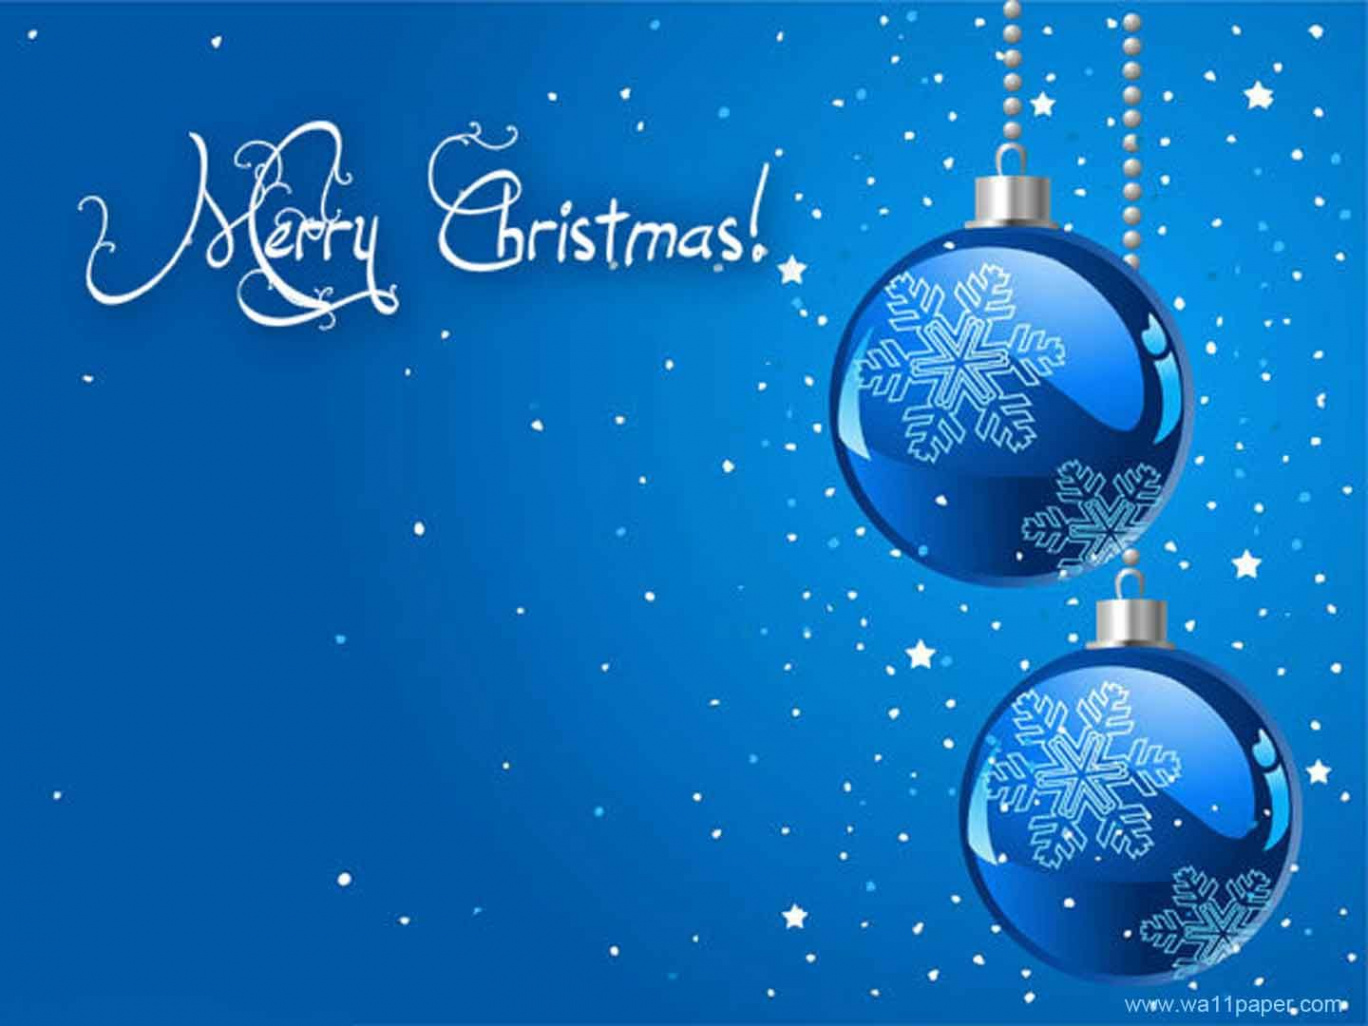 Merry Christmas Wallpapers Wallpaper  Merry christmas background